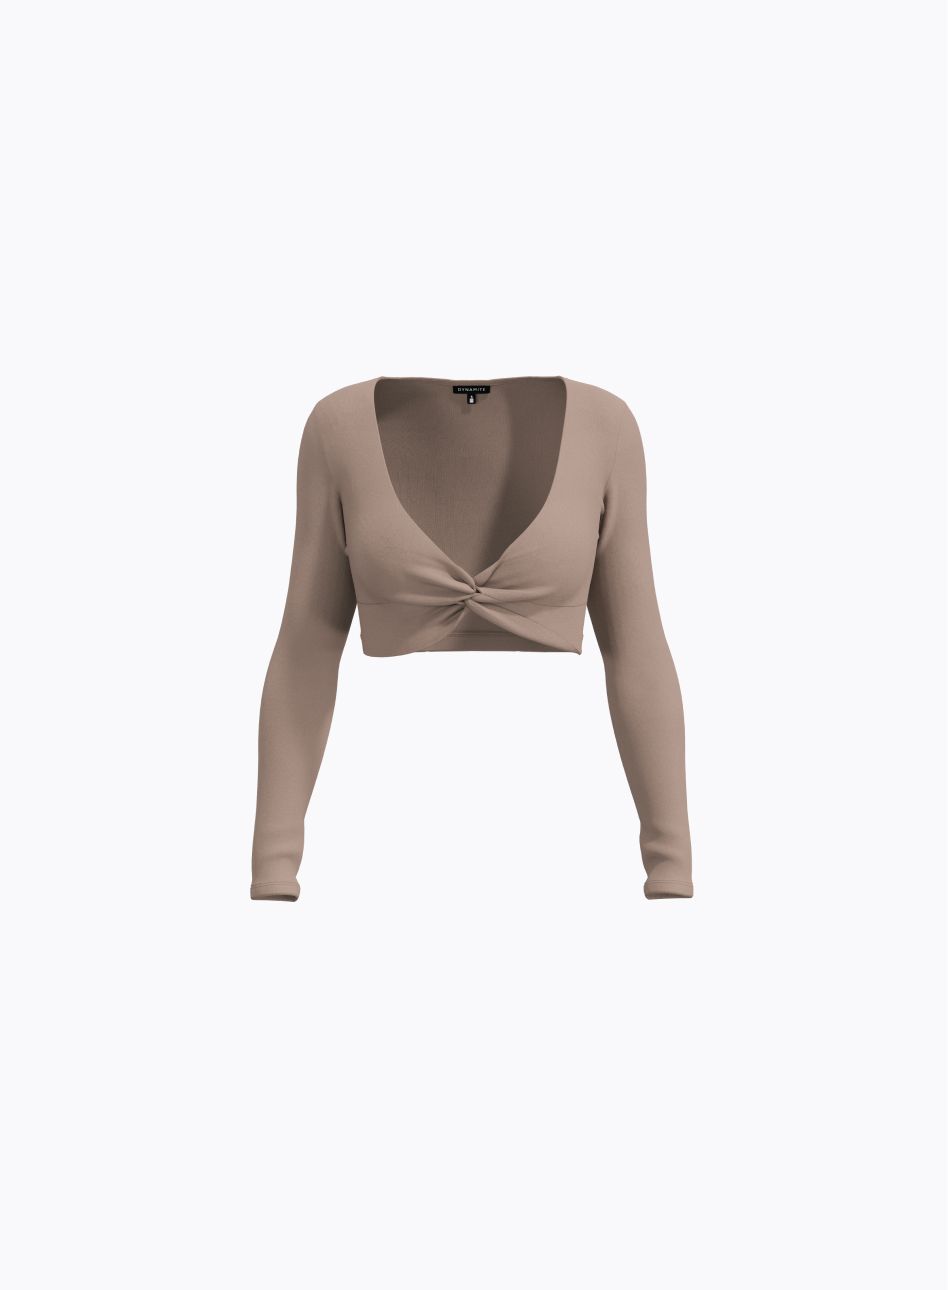 A brown v-neck long sleeve cropped top.